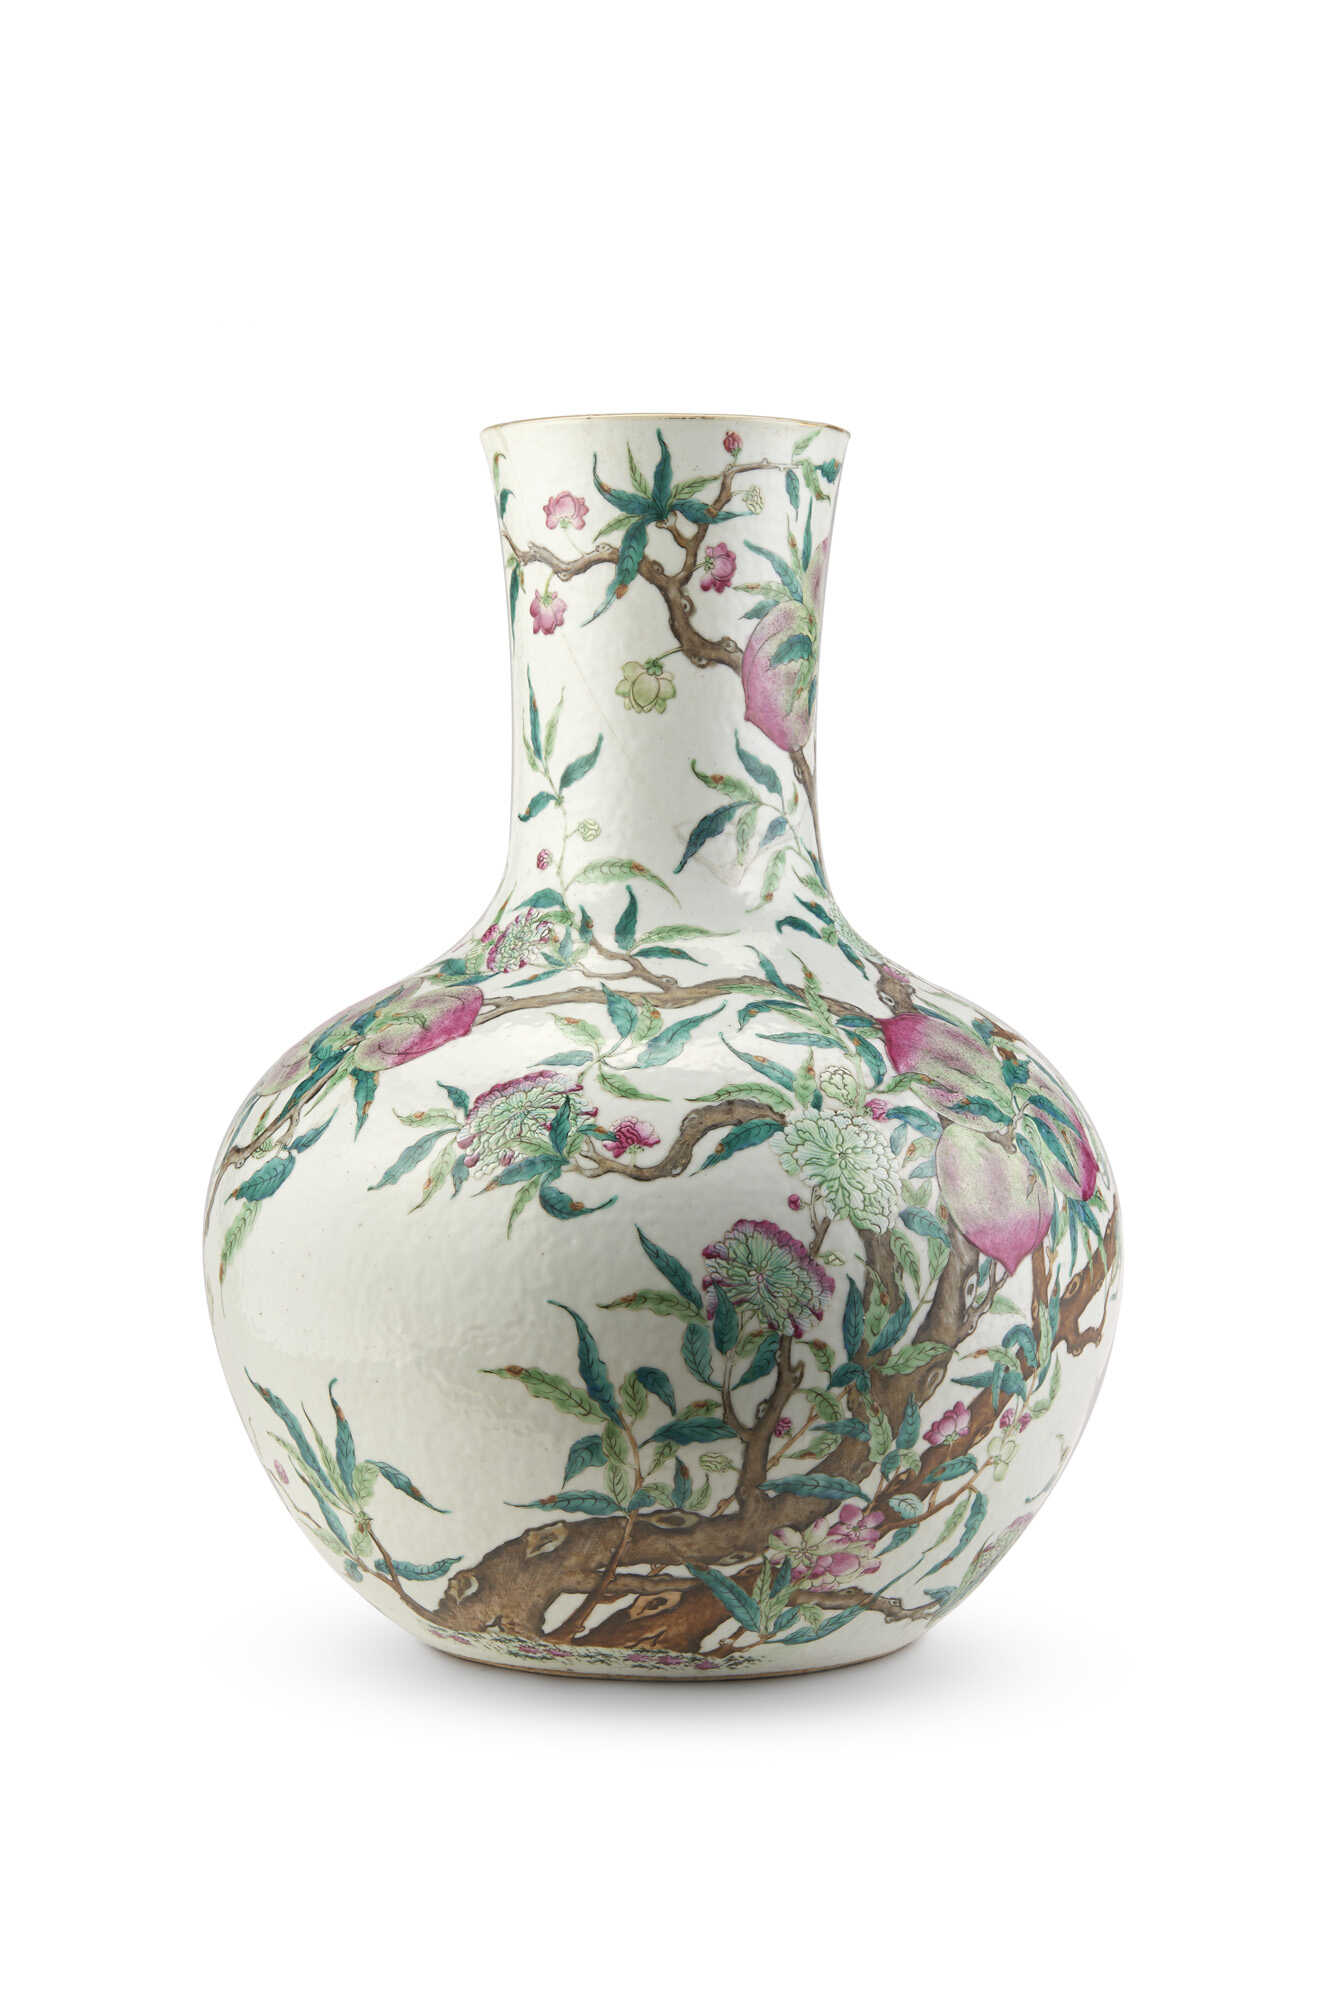 A large tianqiuping, Famille Rose "peaches and buts porcelain vase